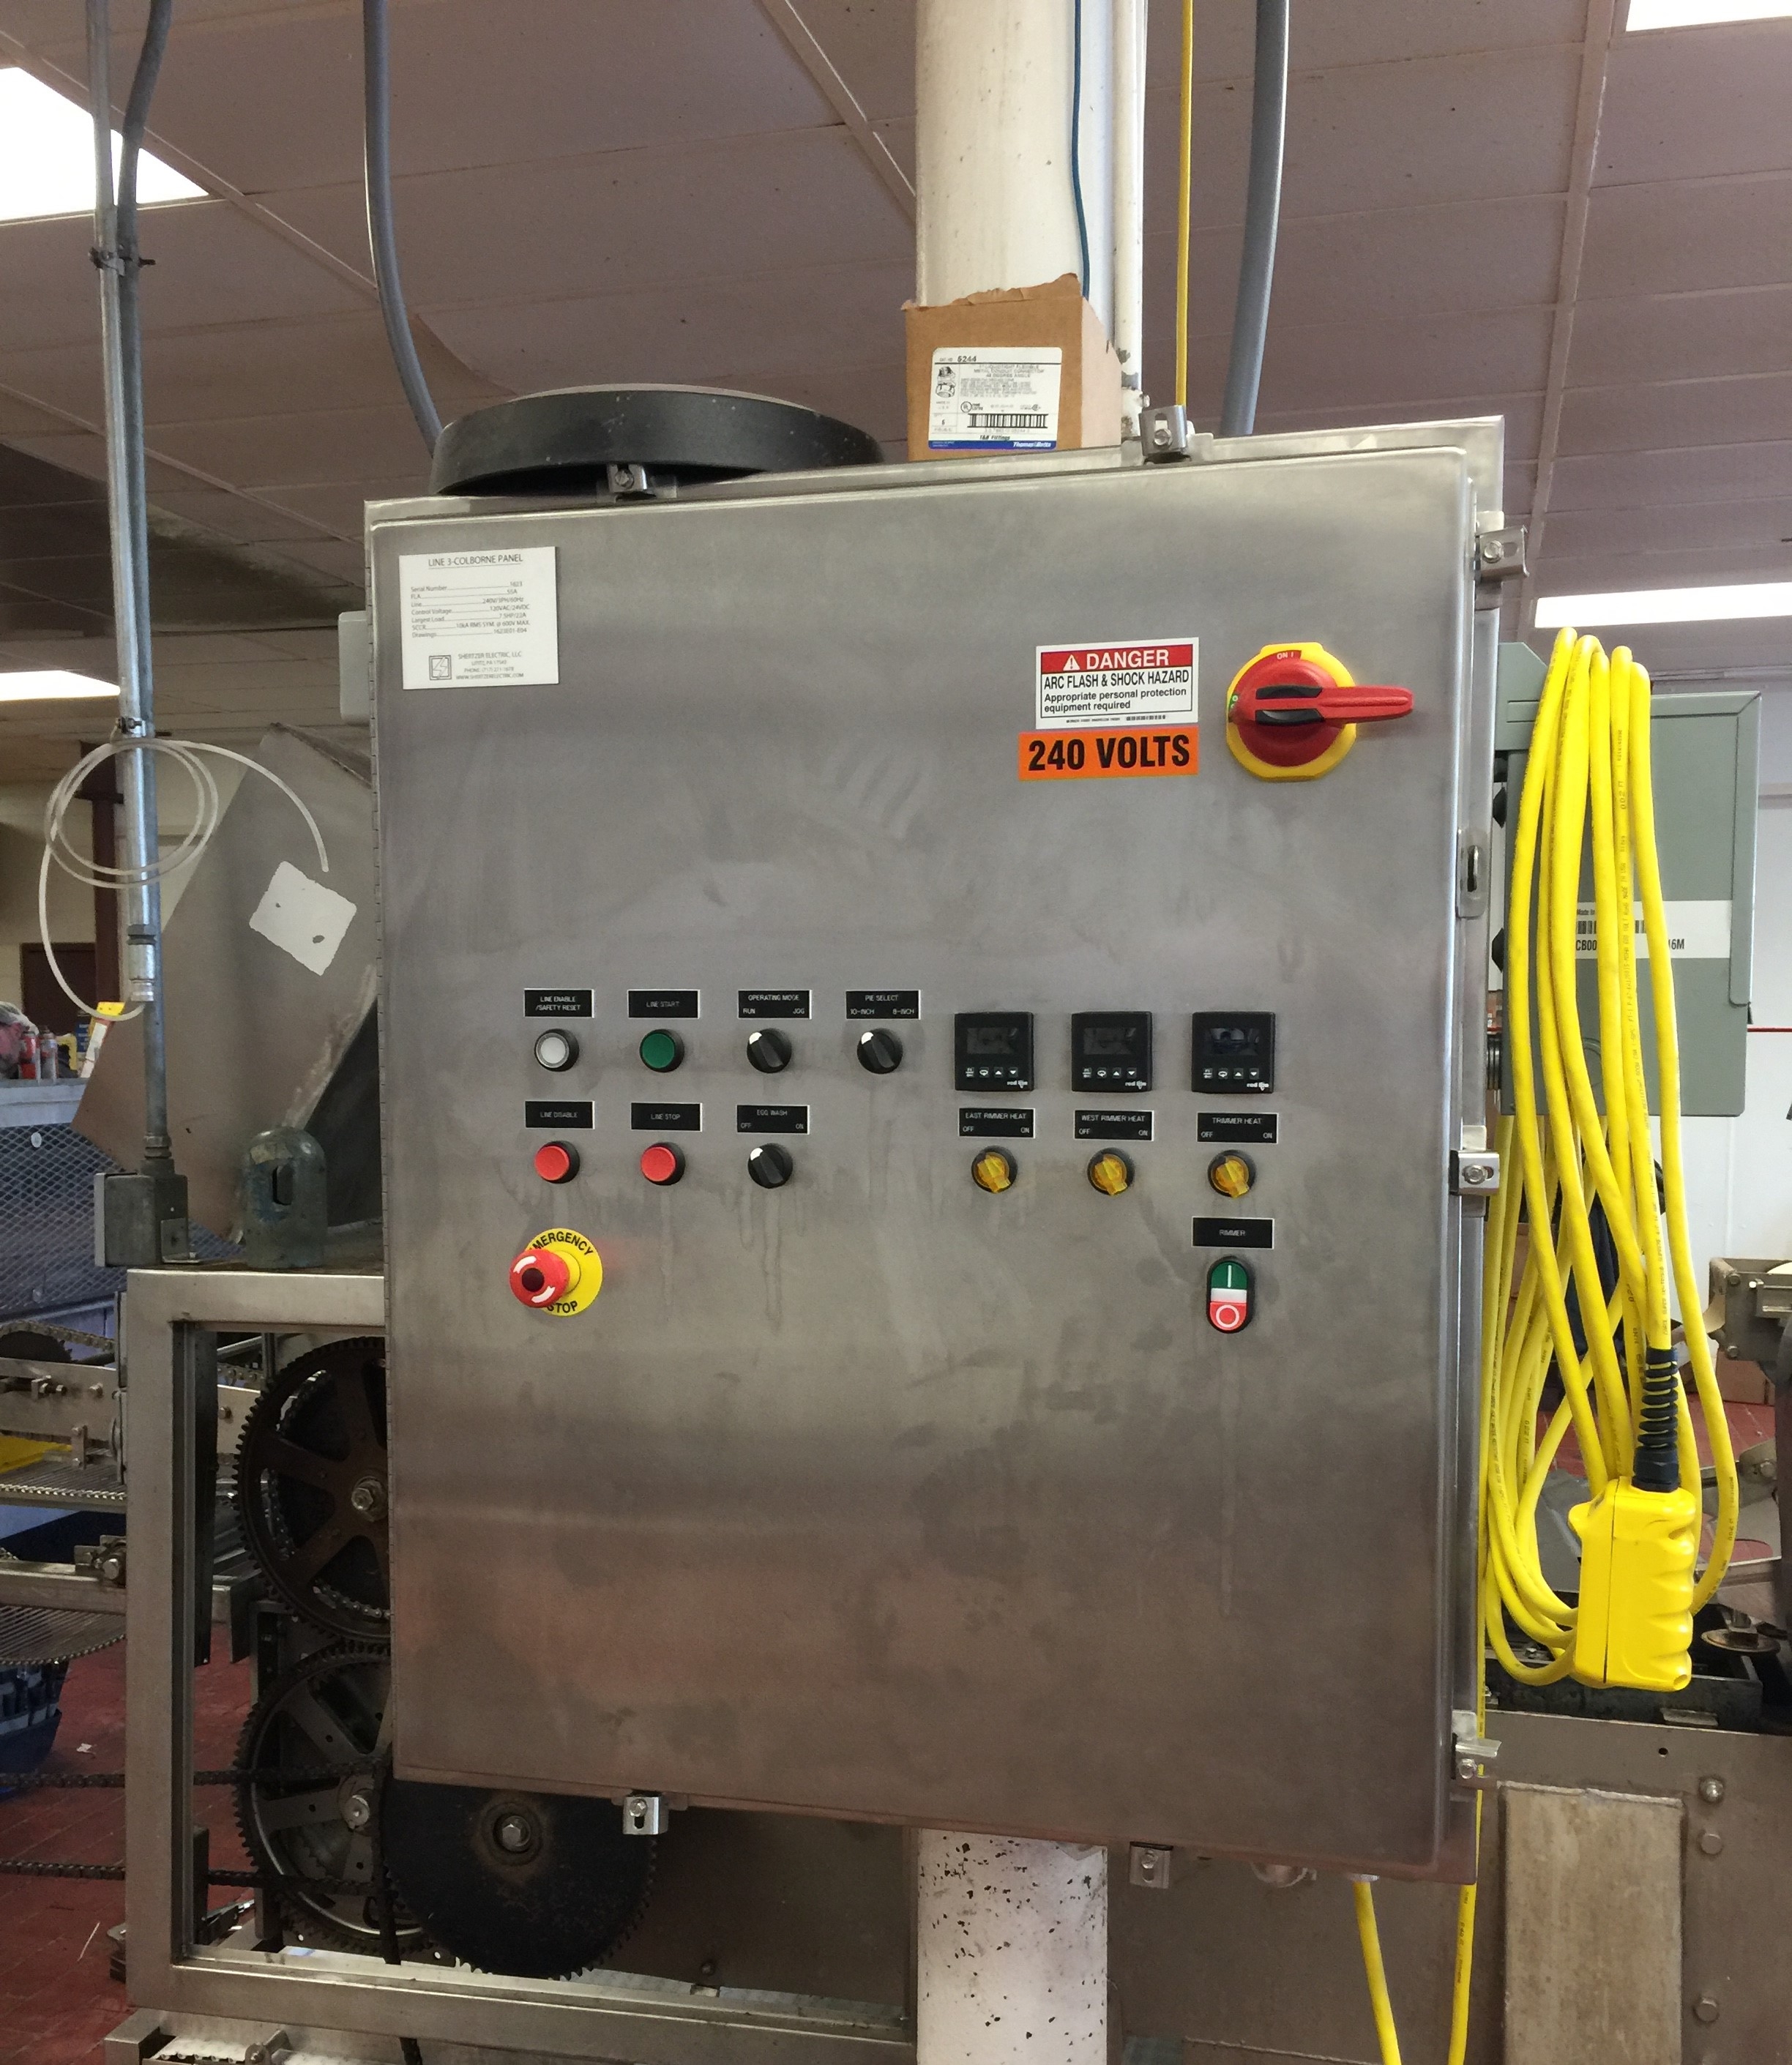 Upgraded production line control panel exterior face.